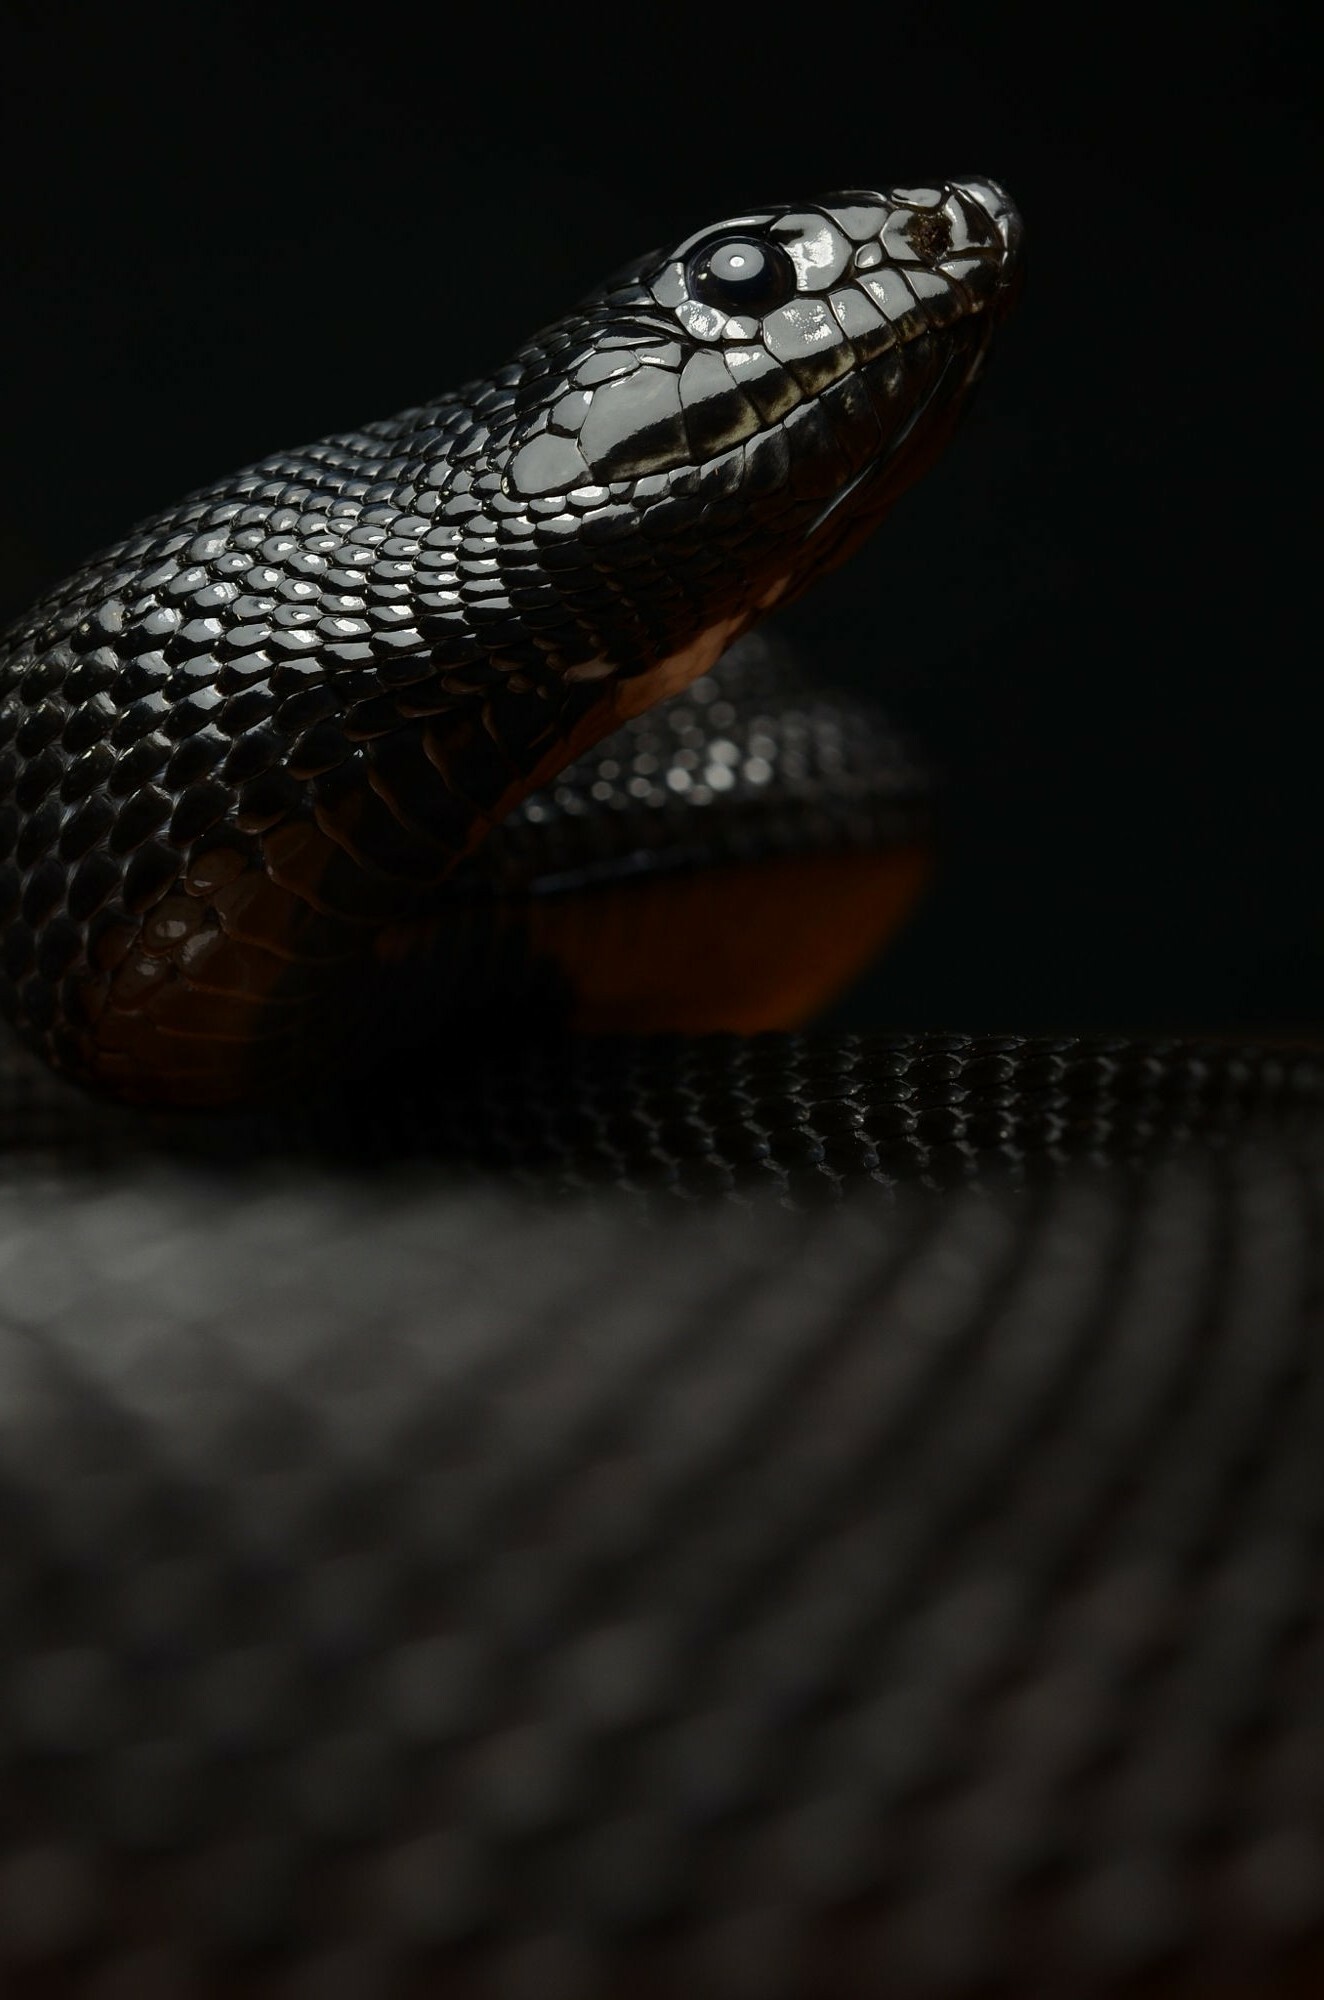 Snake: Reptiles, Species use specialized belly scales to travel, allowing them to grip surfaces. 1330x2000 HD Wallpaper.